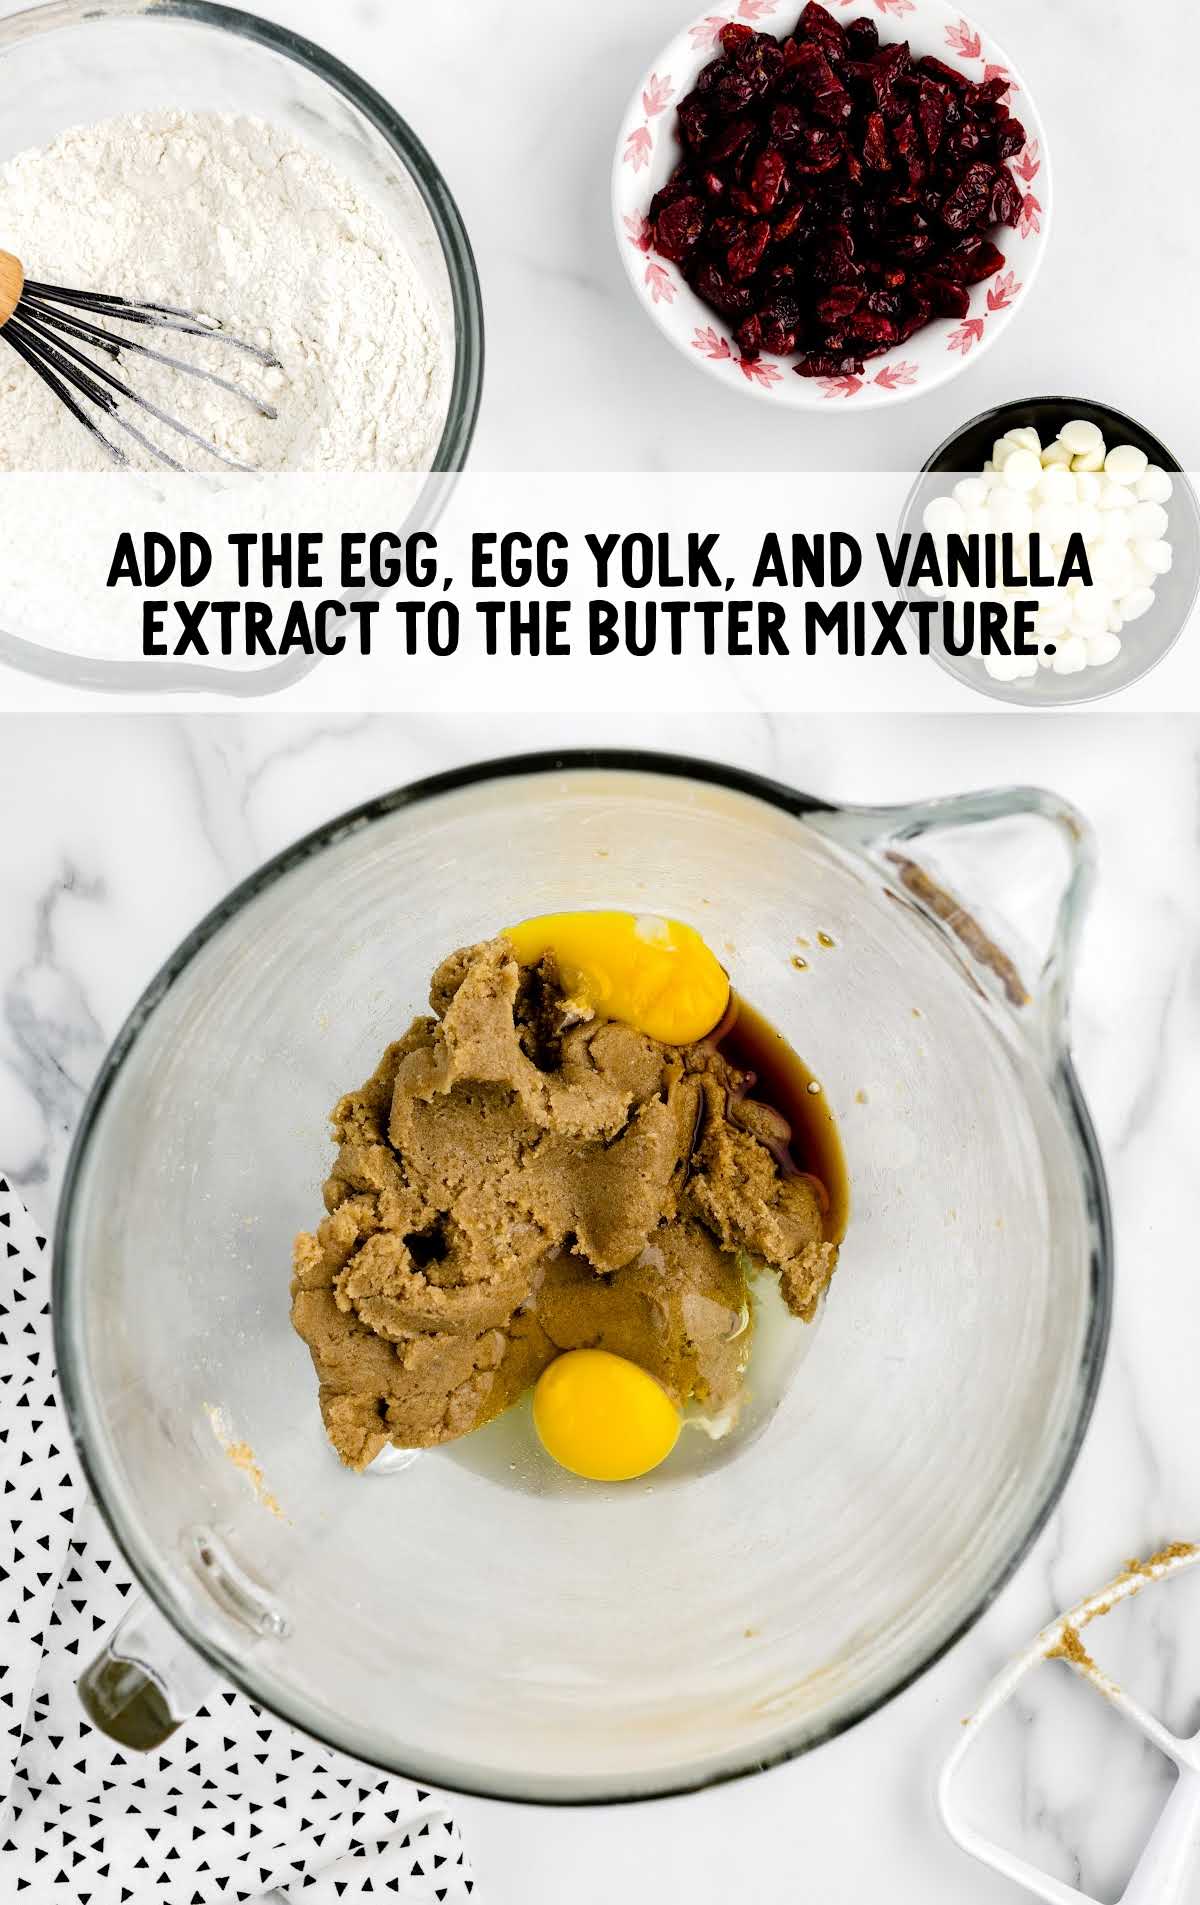 egg yolk, egg, and vanilla extract combined to the butter mixture